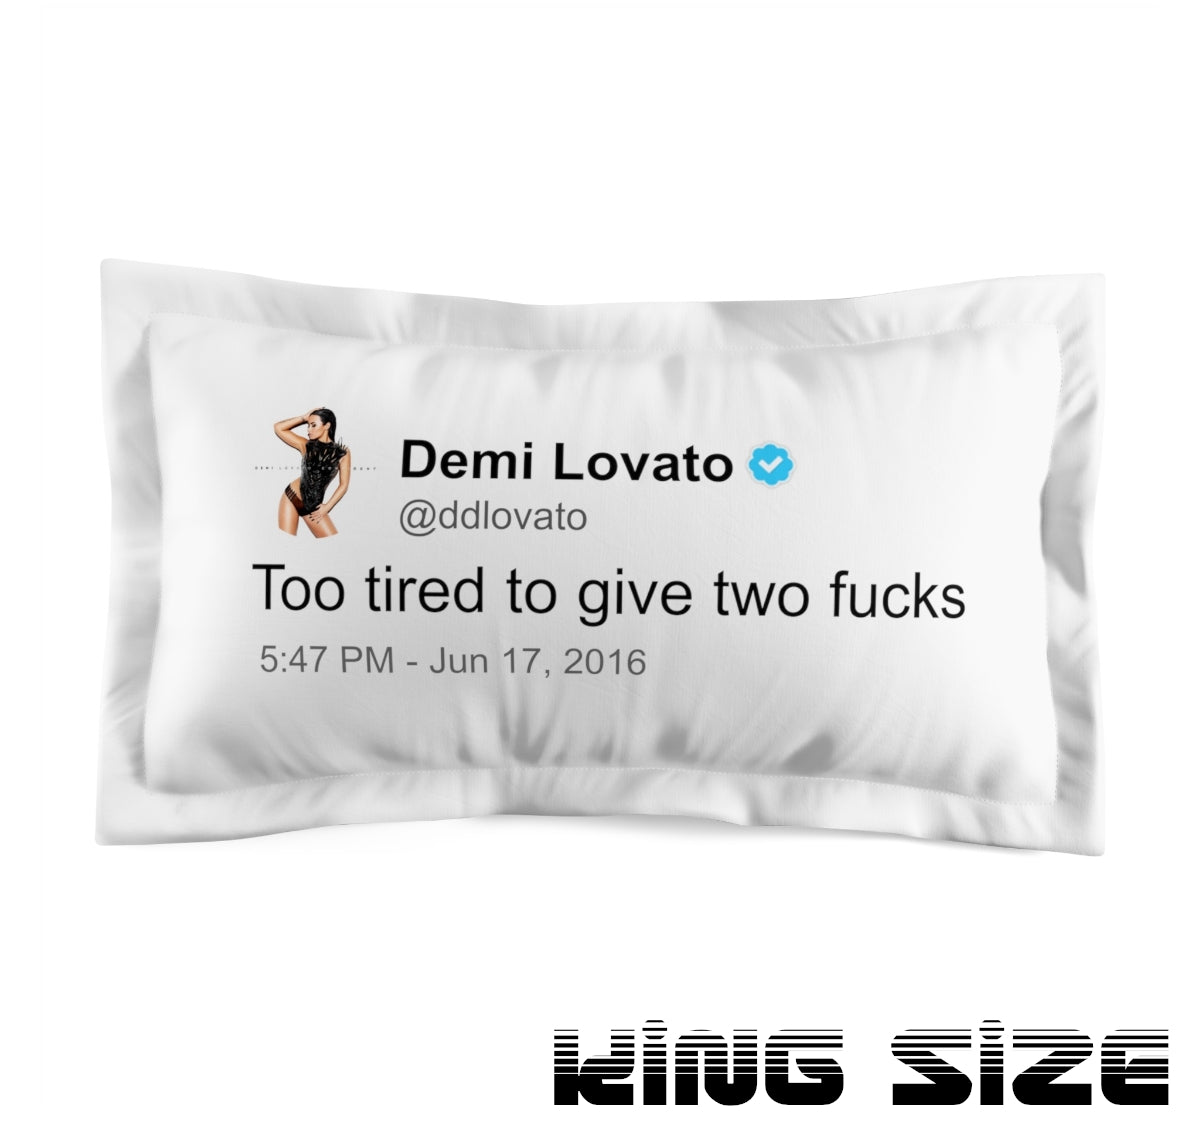 Preview of the king size version of Demi Lovato tweet pillow case